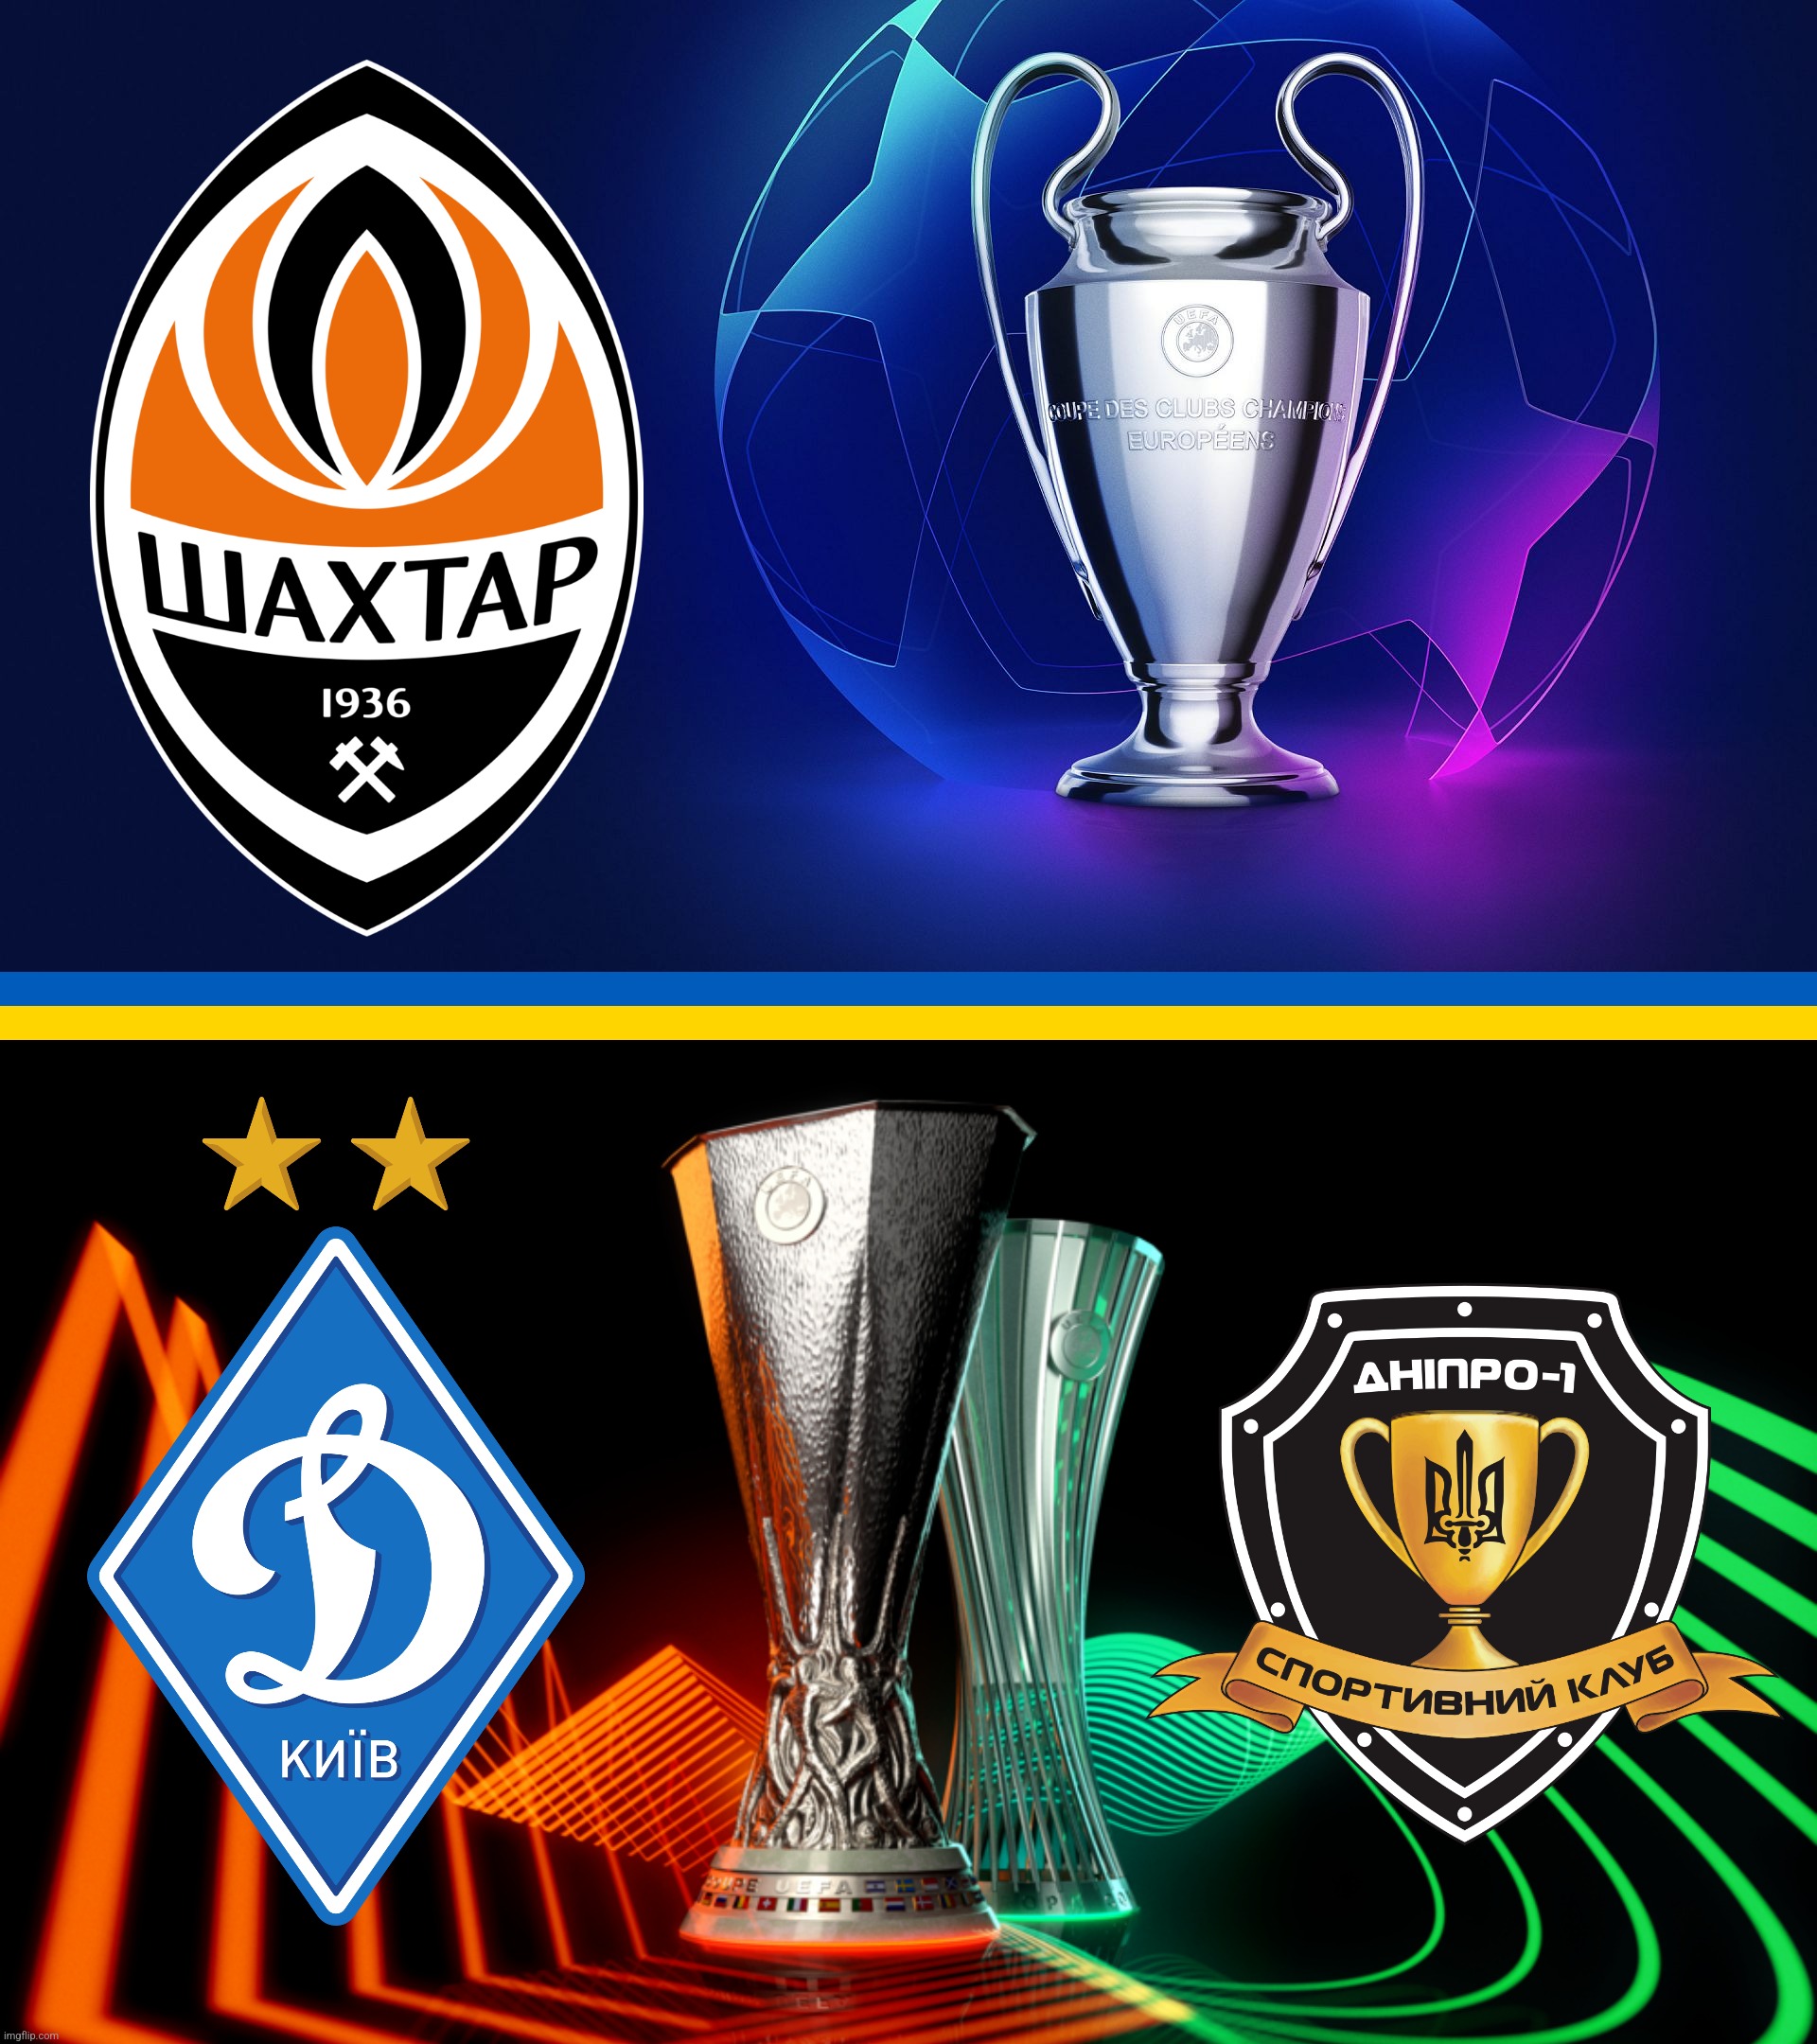 Shakhtar in Champions League, Dynamo Kyiv in Europa League and Dnipro-1 in Conference League 2022-2023. #SlavaUkraini | image tagged in ukraine,champions league,europe,conference,futbol | made w/ Imgflip meme maker